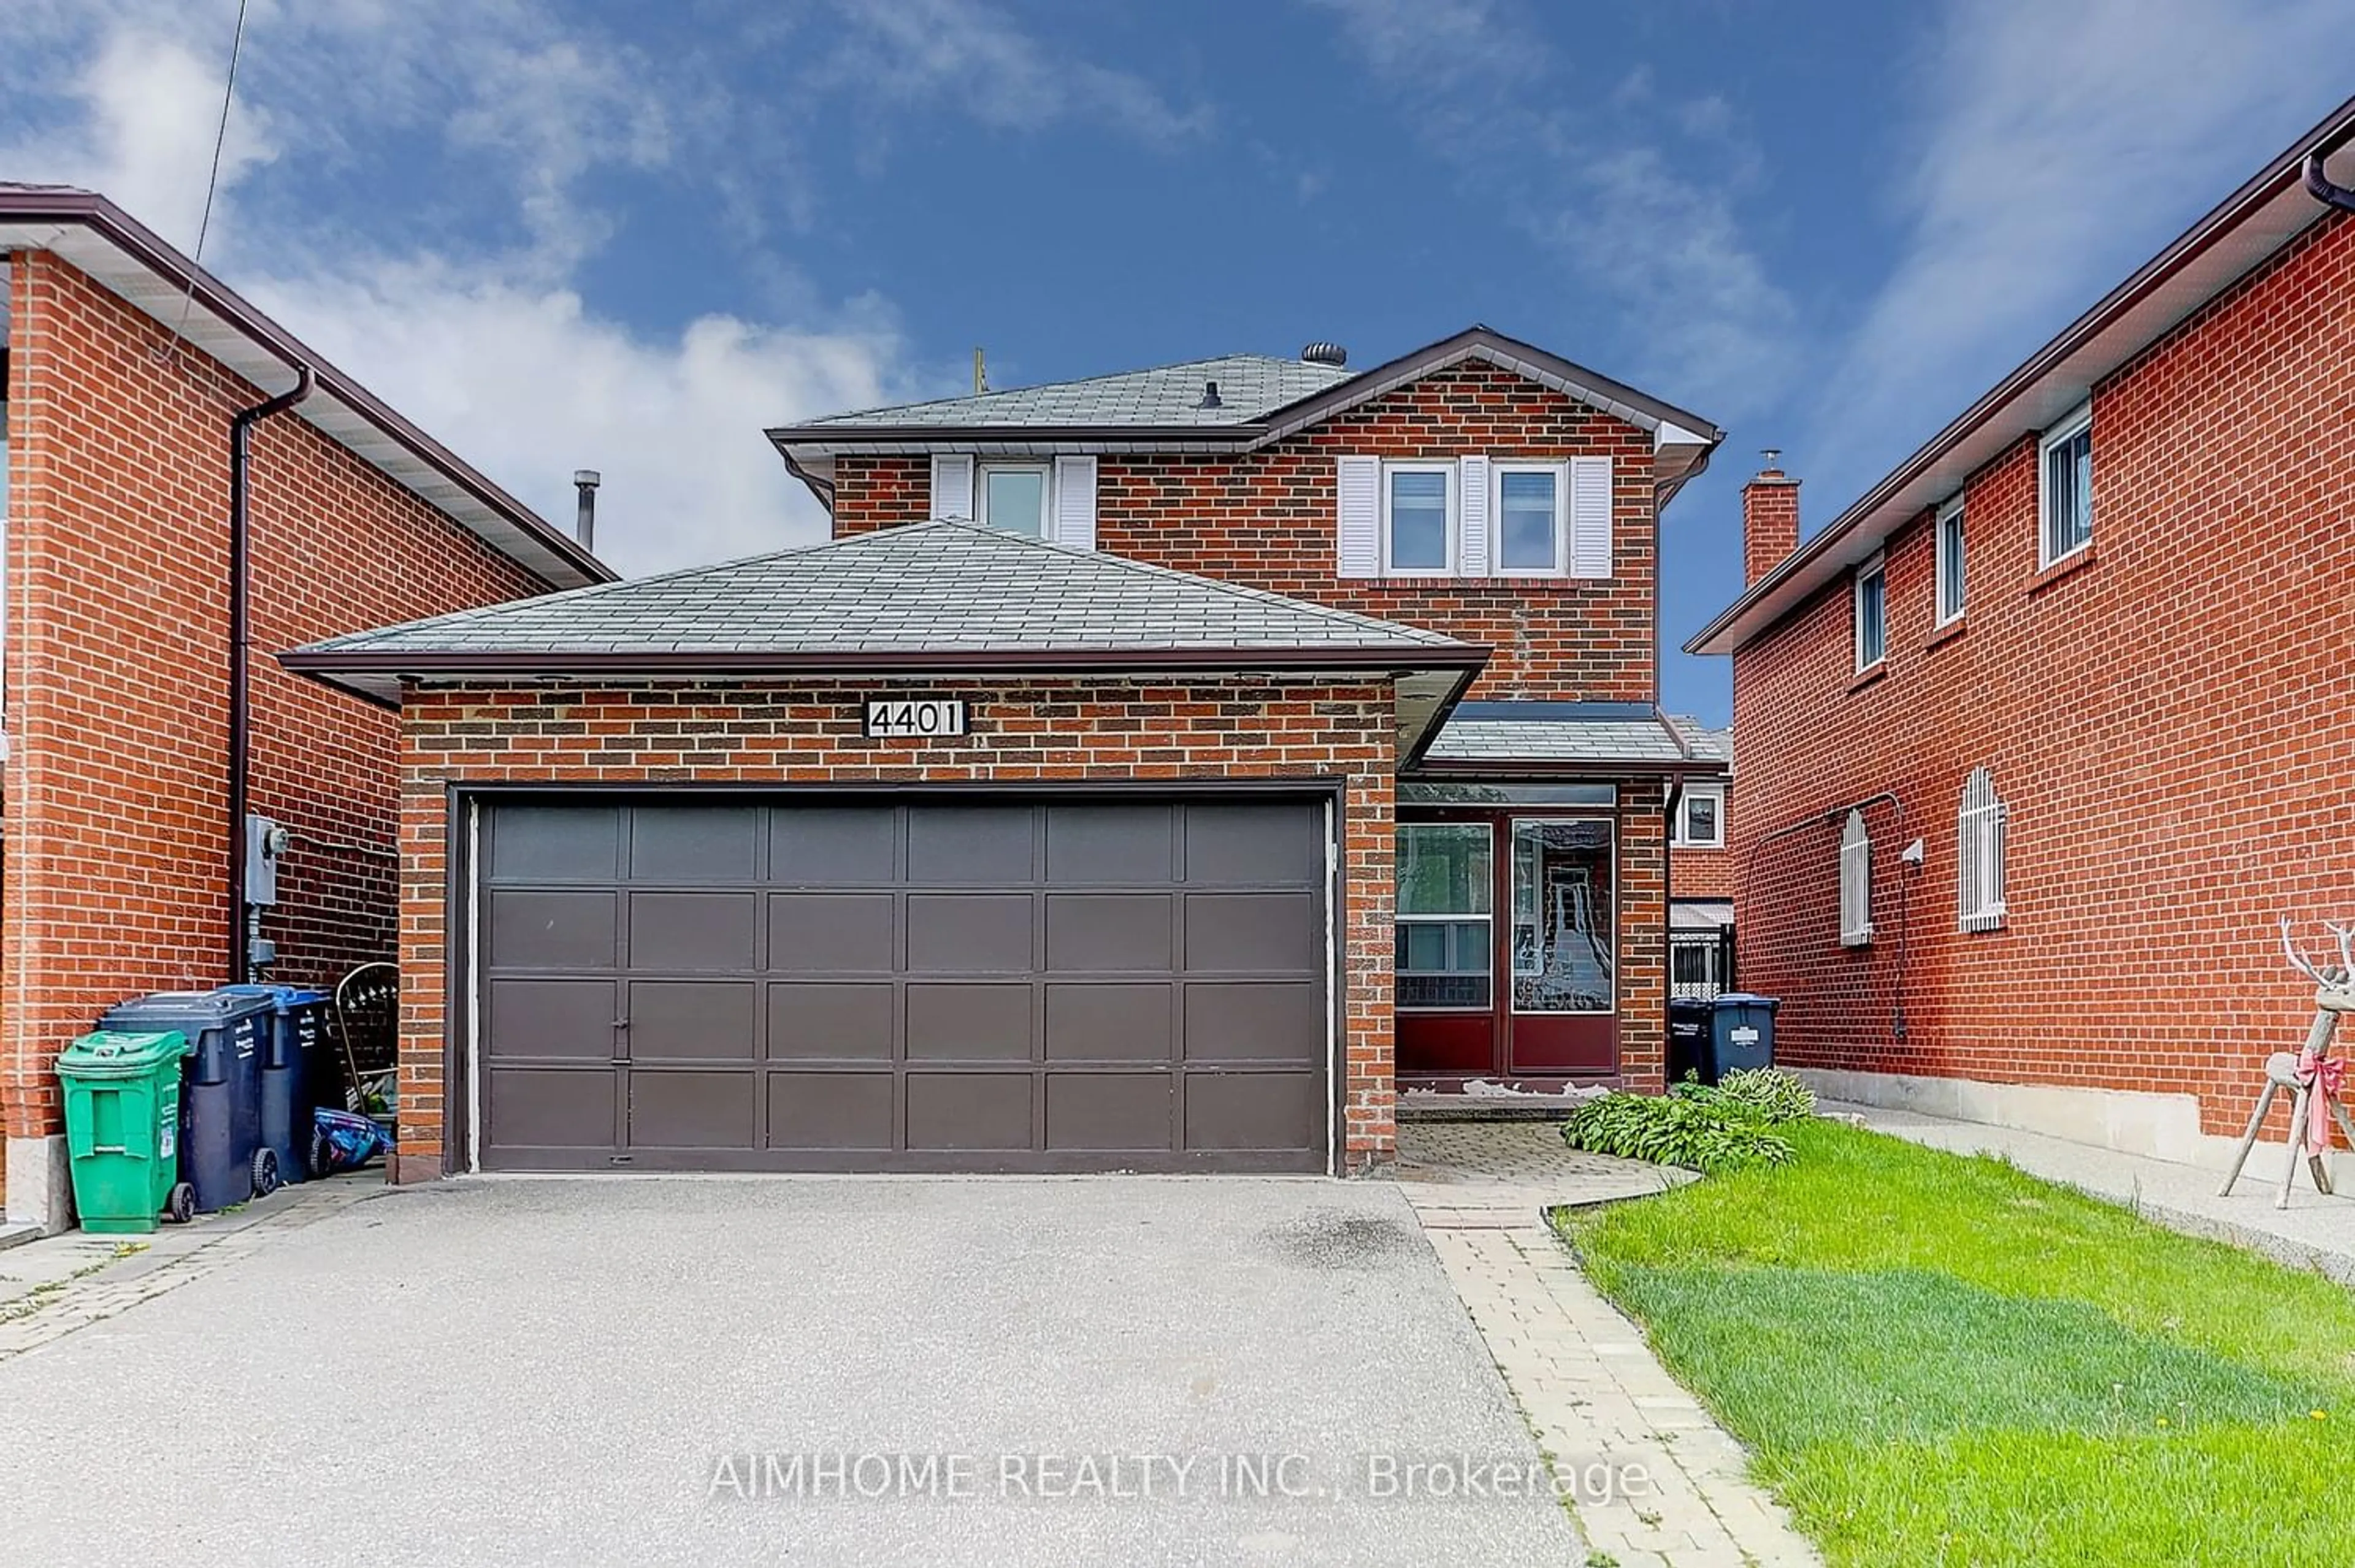 Home with brick exterior material for 4401 Curia Cres, Mississauga Ontario L4Z 2Y2